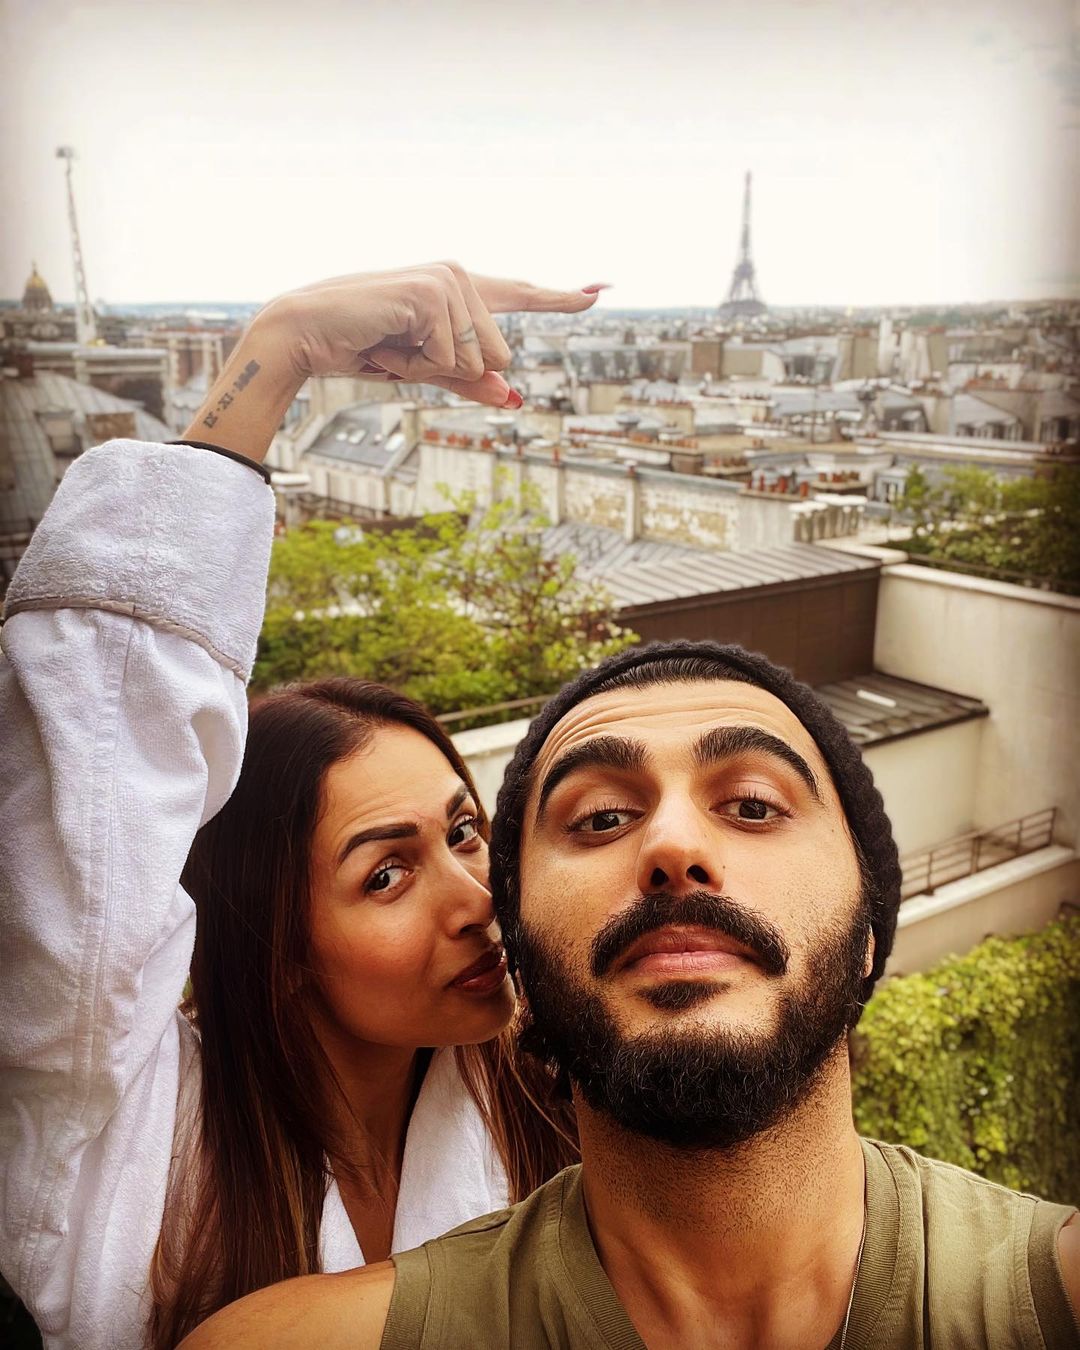 Malaika Arora points towards the Eiffel Tower as the couple pose for a selfie.